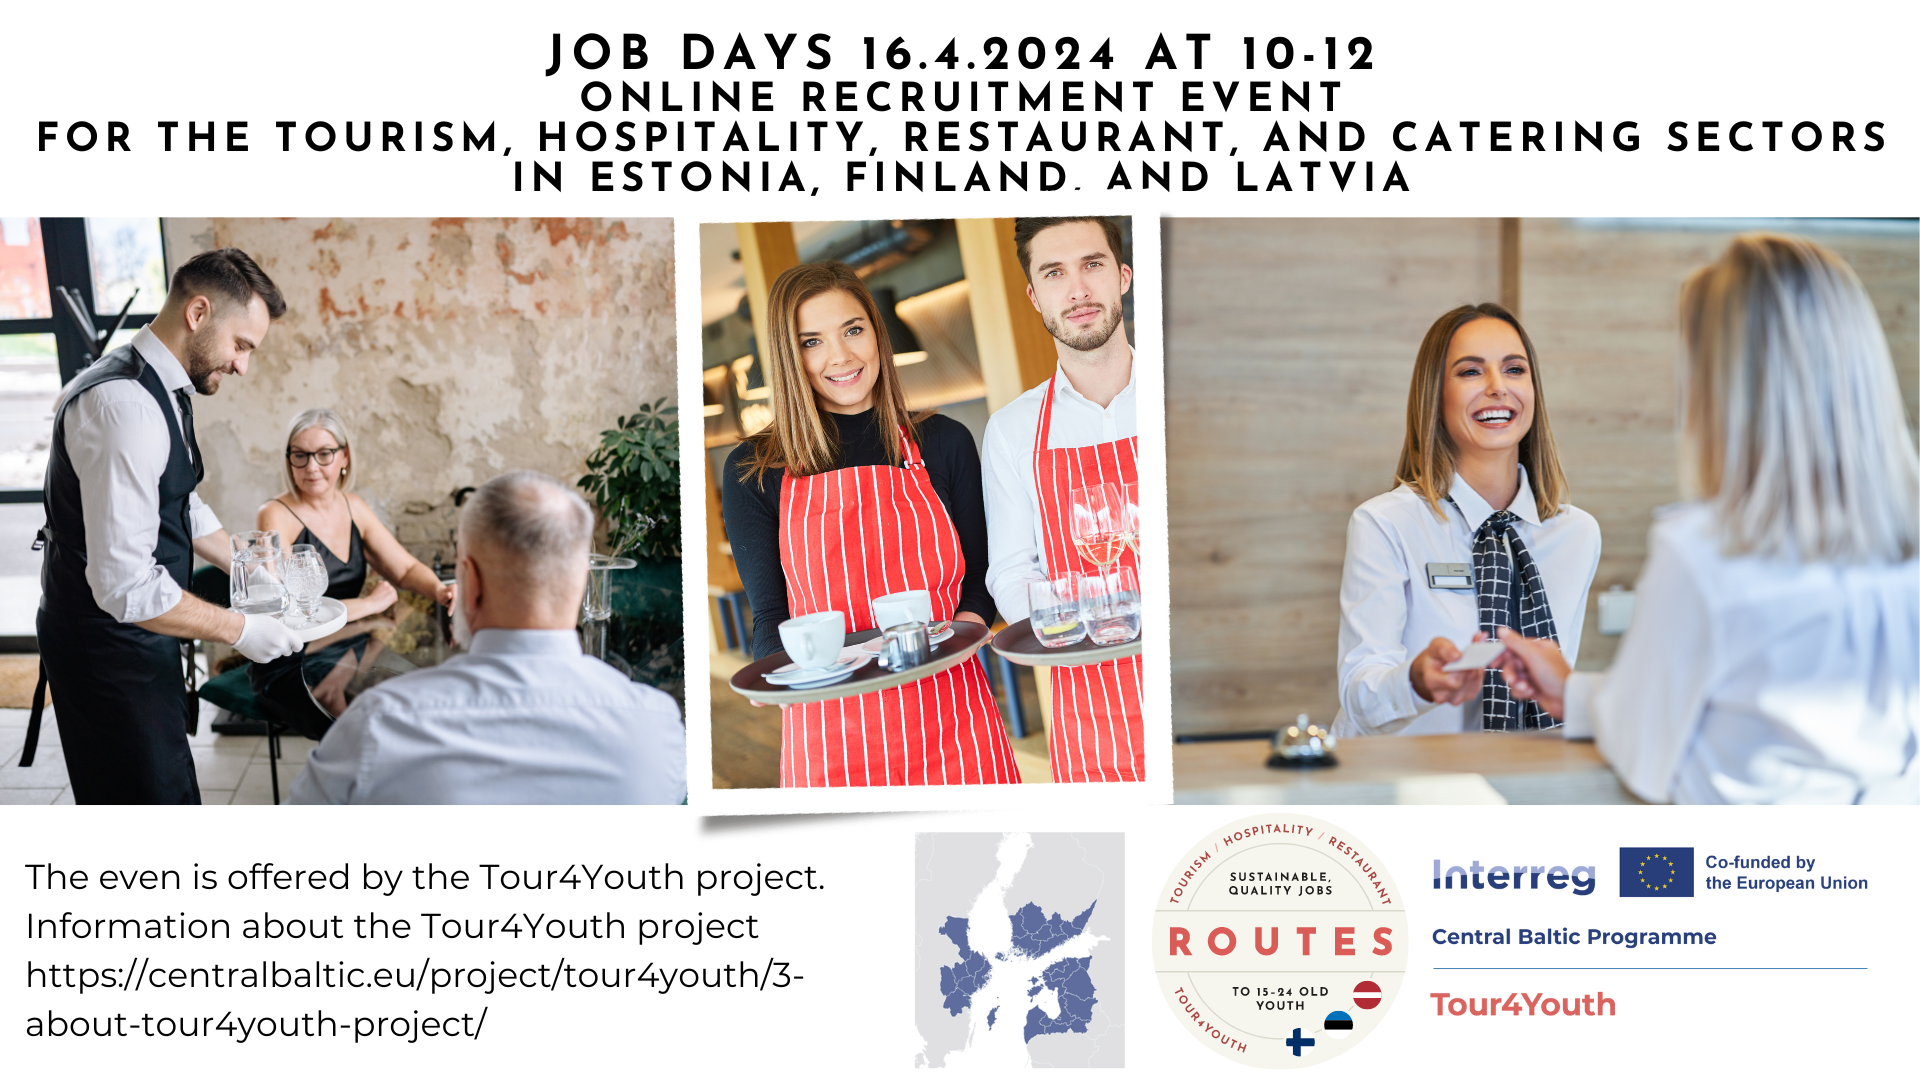 job-days-16.4.2024-work-in-estonia-finland-latvia-online-recruitment-event-for-the-tourism-hospitality-restaurant-and-catering-sectors.png